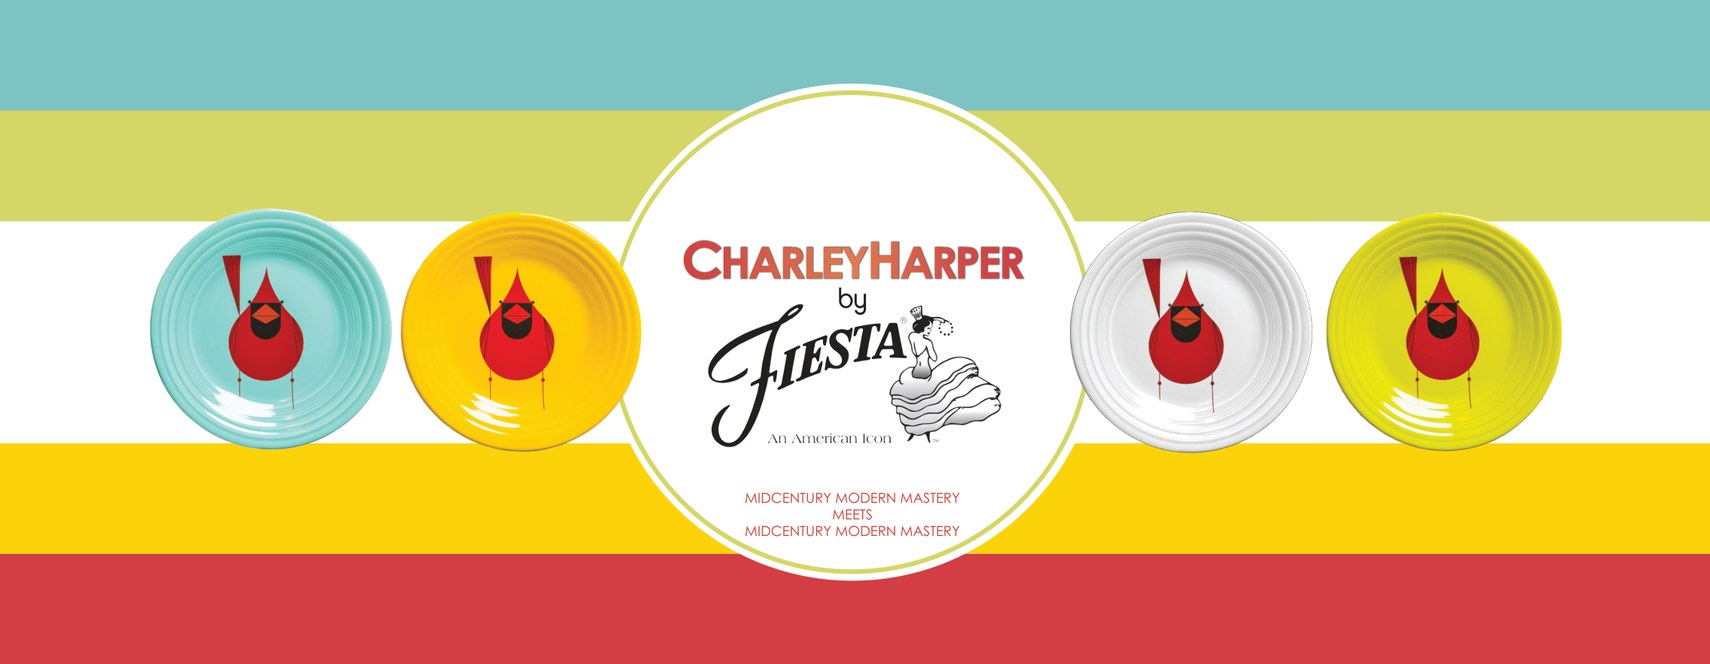 CharleyHarper by Fiesta®, An American Icon: Mid-Century Modern Mastery Meets Mid-Century Modern Mastery